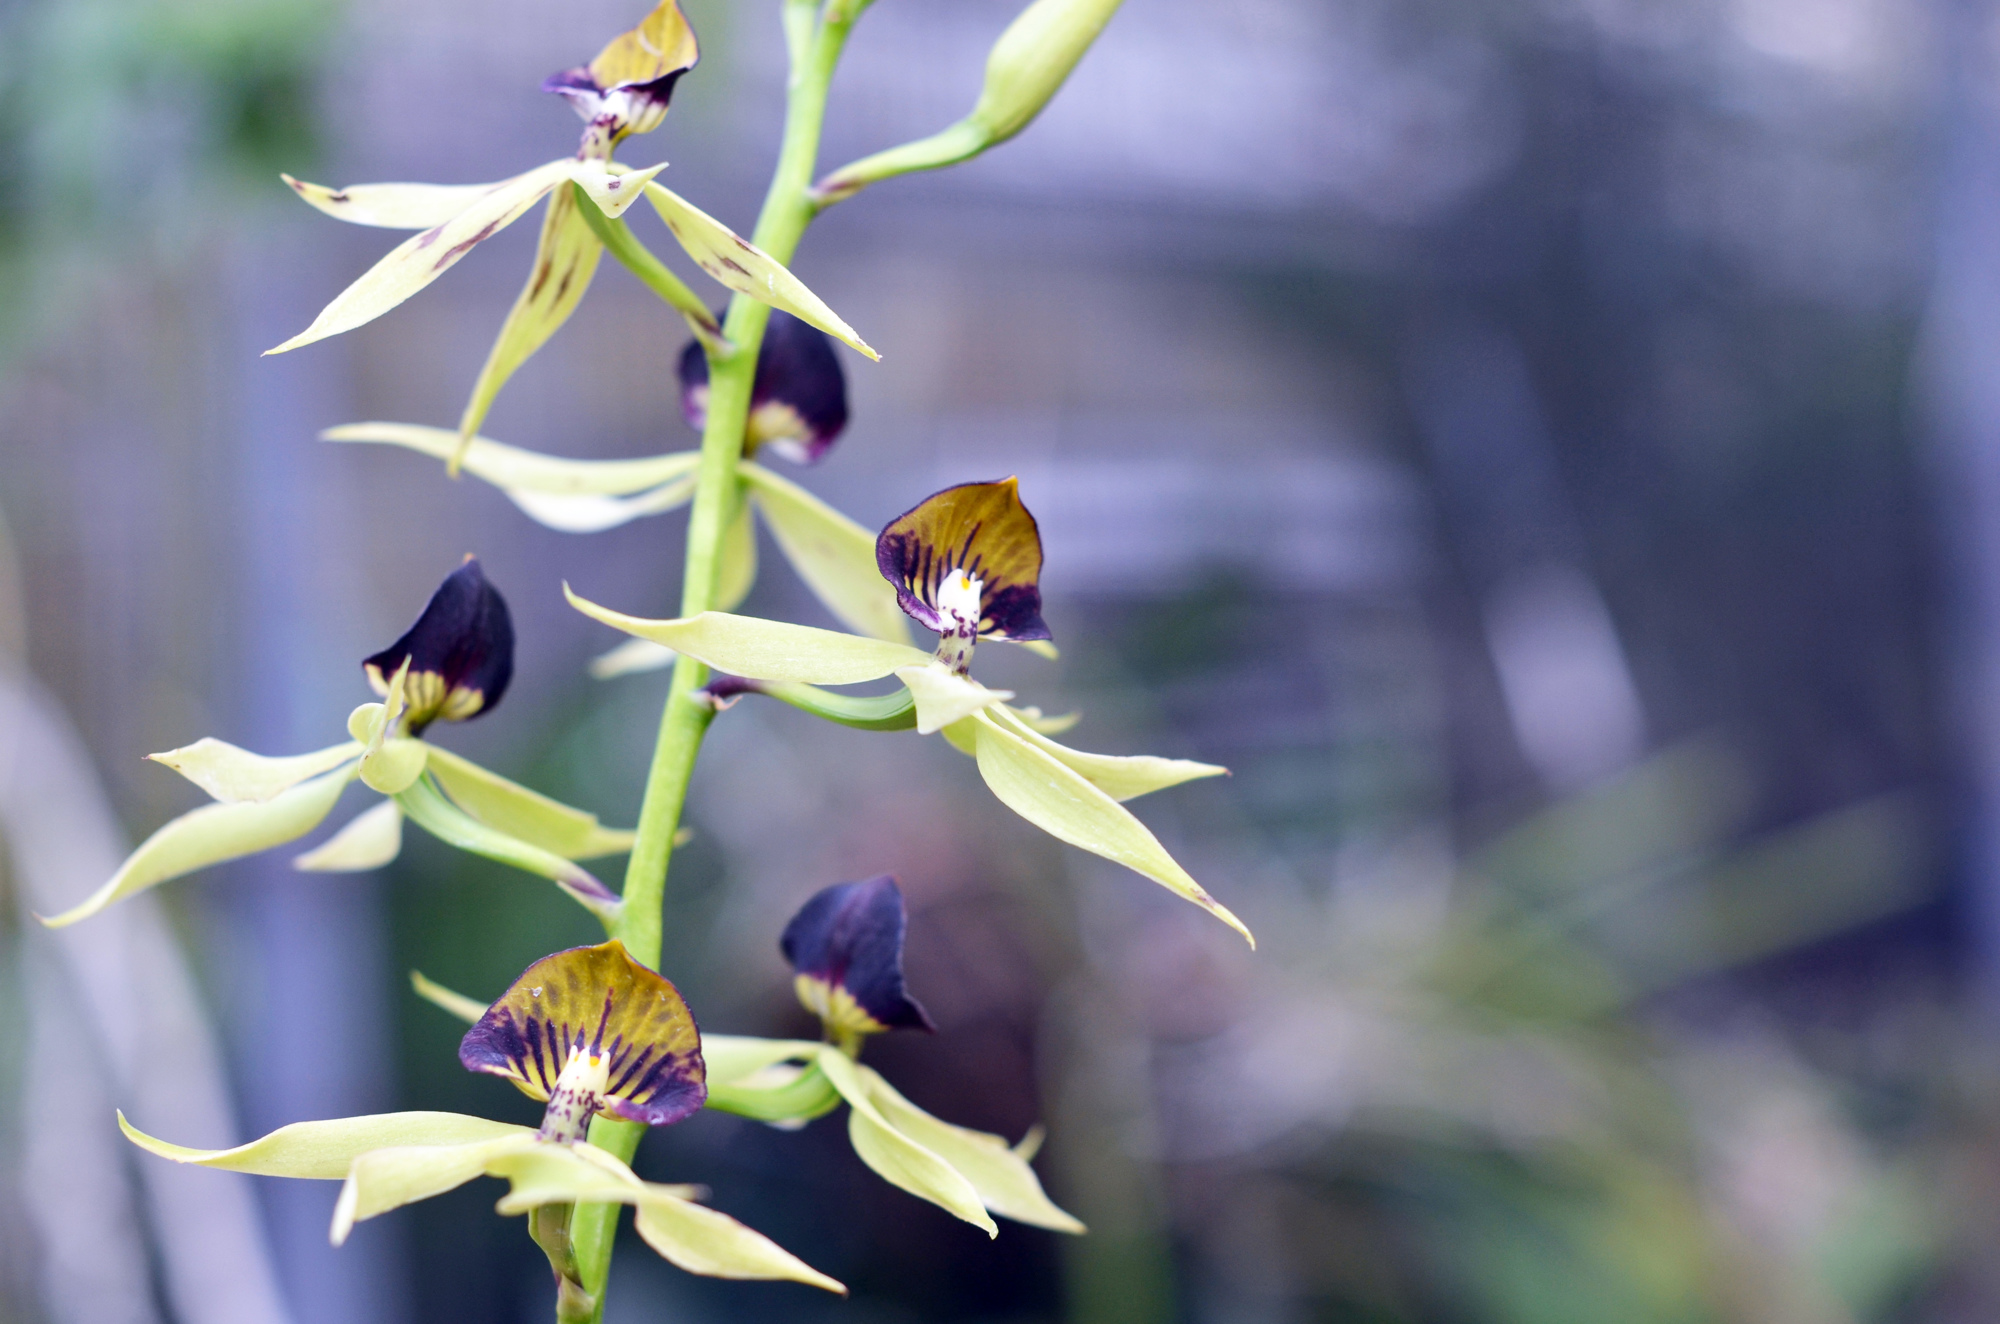 Clamshell orchid — a Florida native plant, with the lip petal facing upwards.